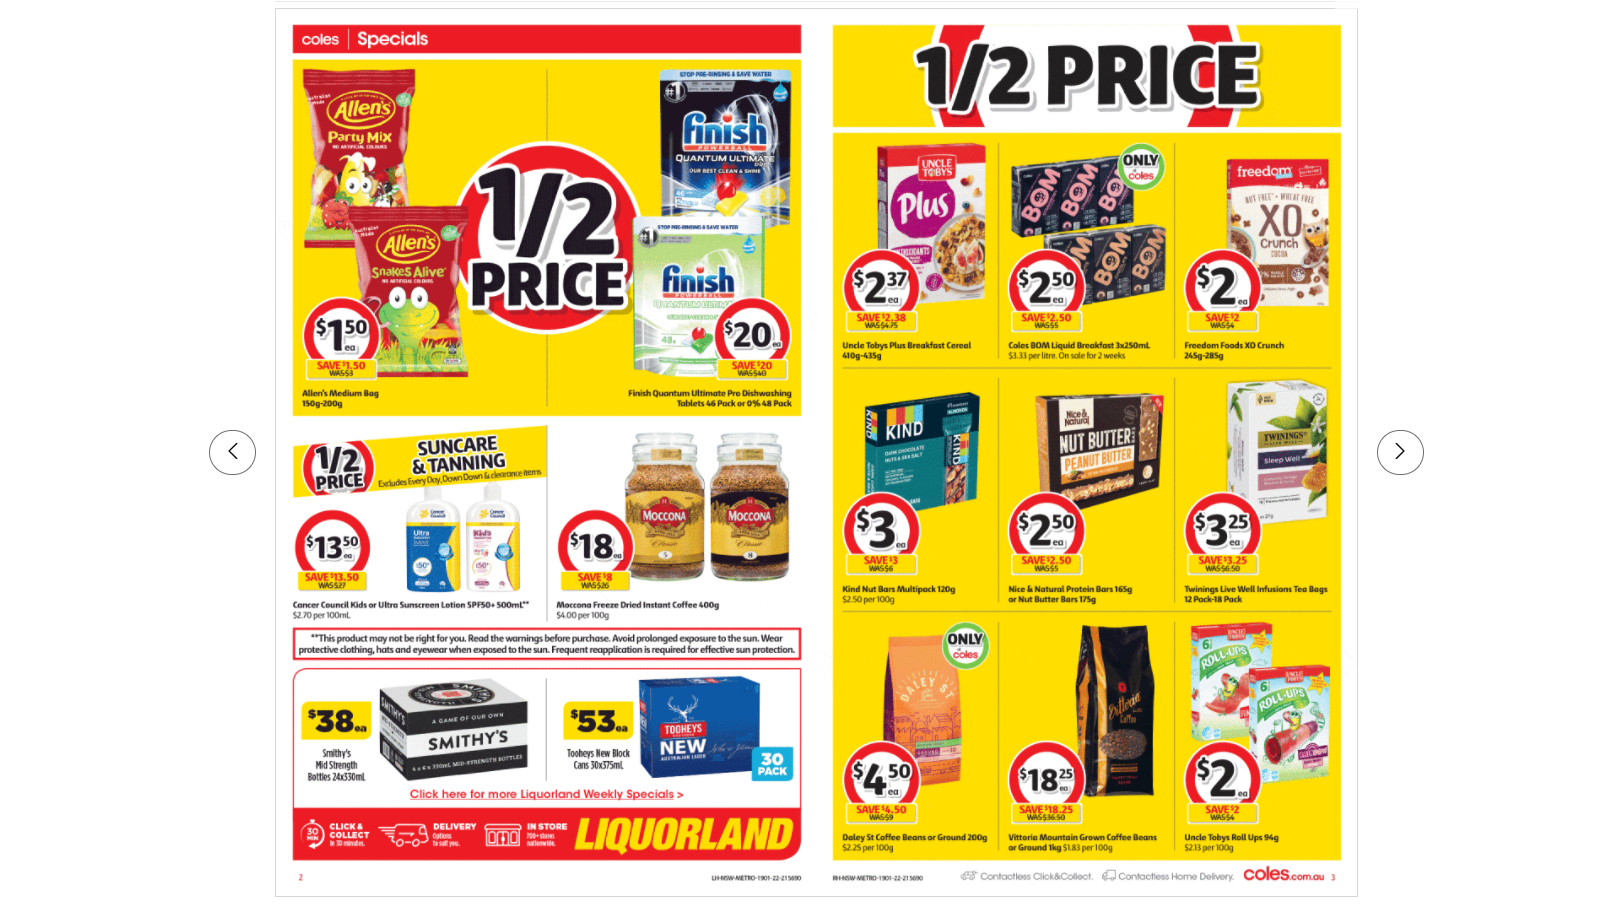 Coles this week's catalogue up to 50% OFF on groceries, beauty & everyday essentials(until 25th Jan)